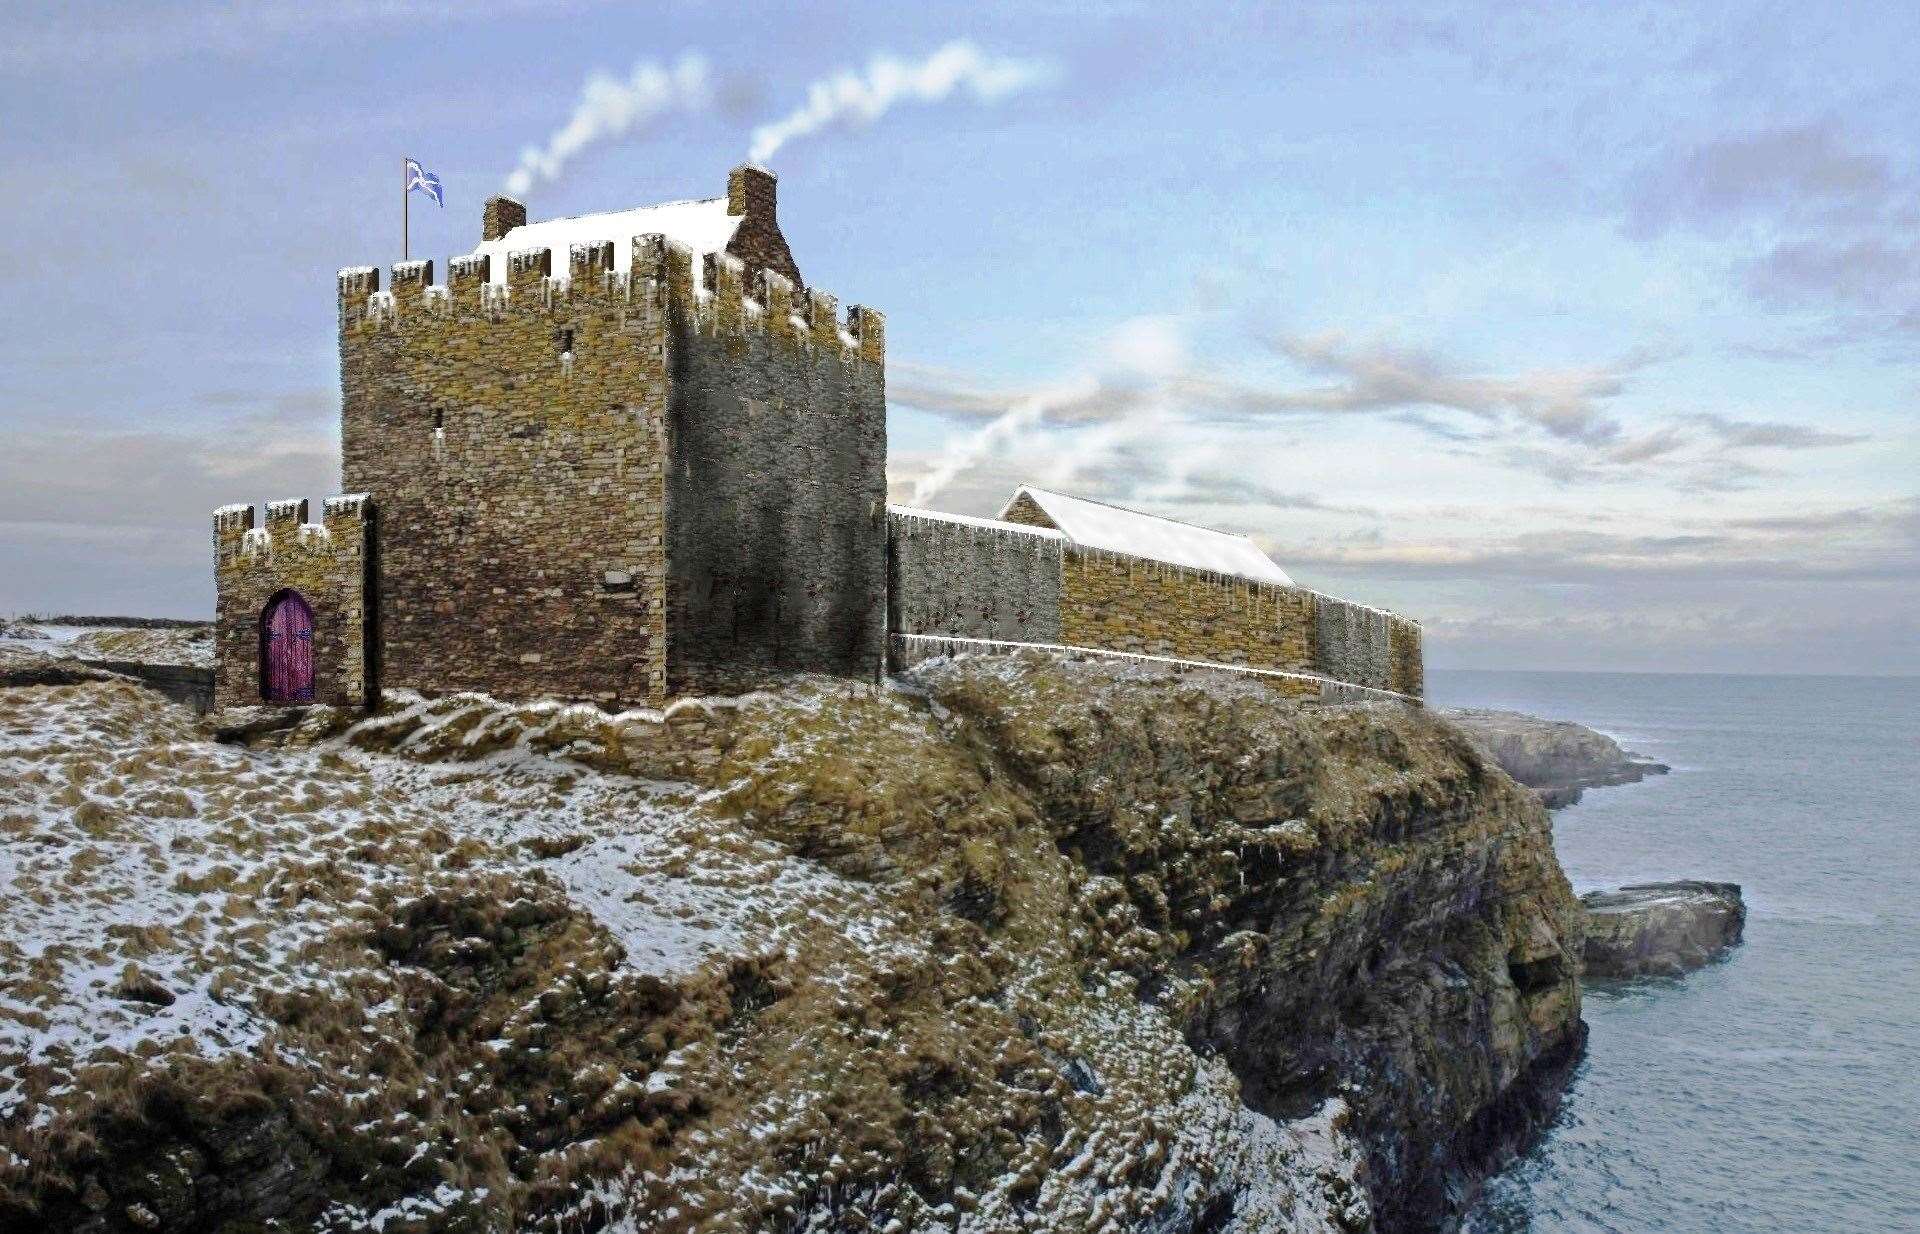 Old Wick Castle as it may have looked in the 1500s from an artwork by Andrew Spratt.